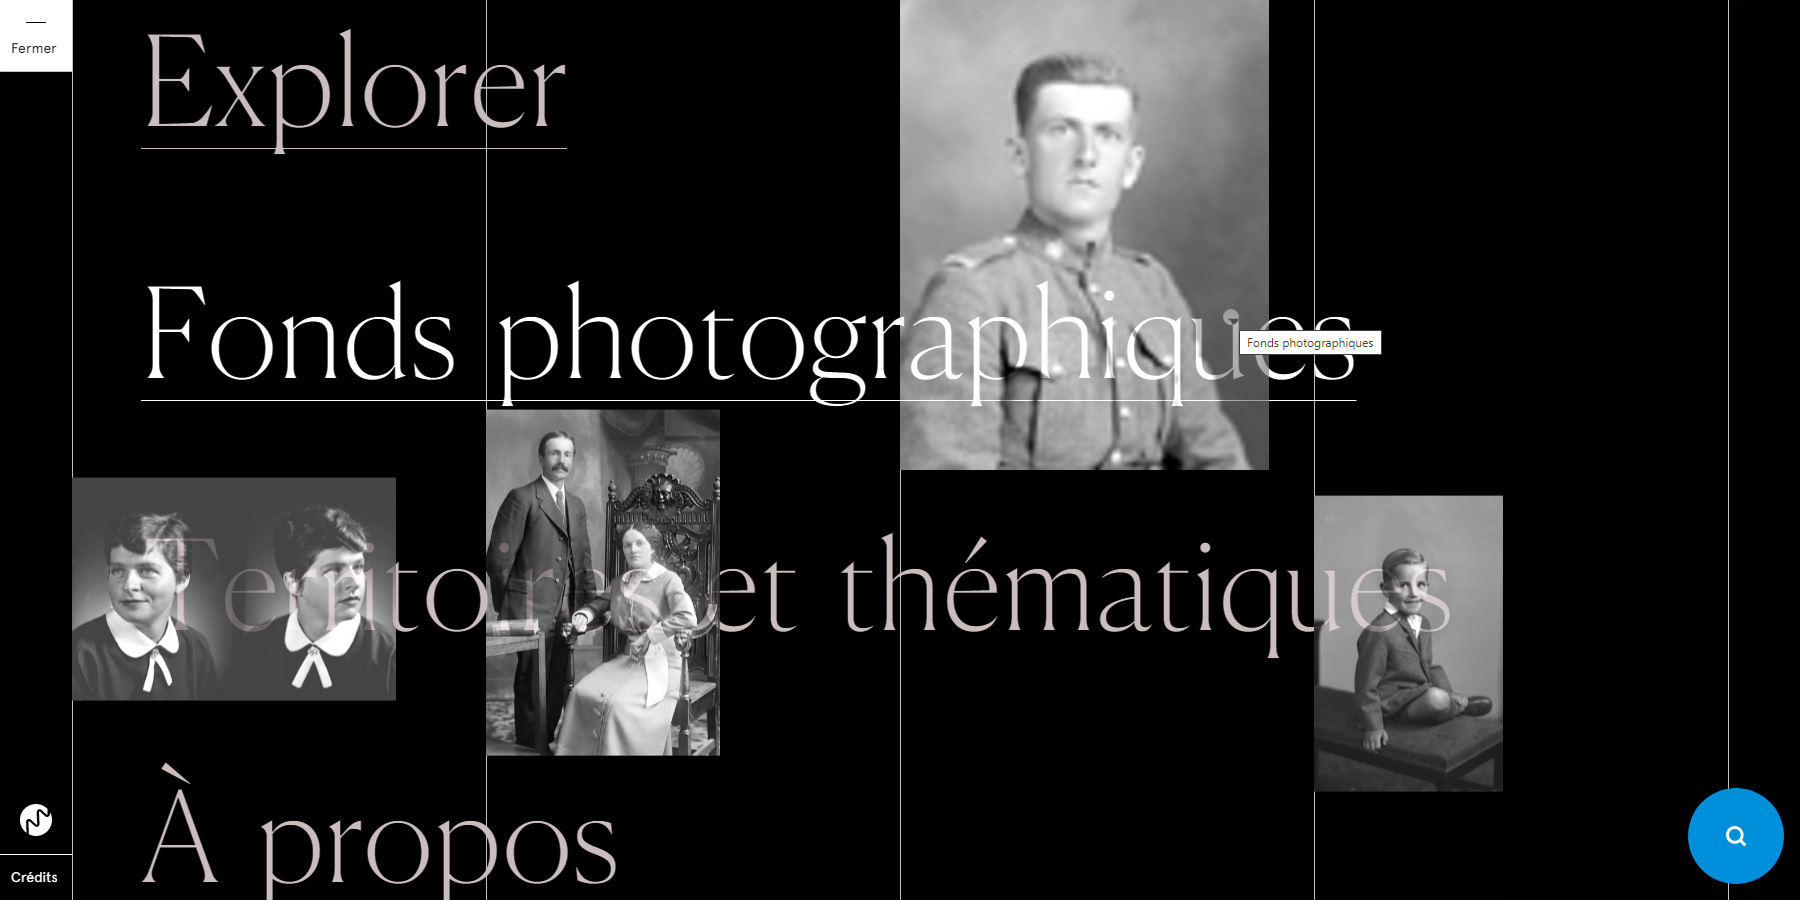 Cyberphotos - Website of the Day